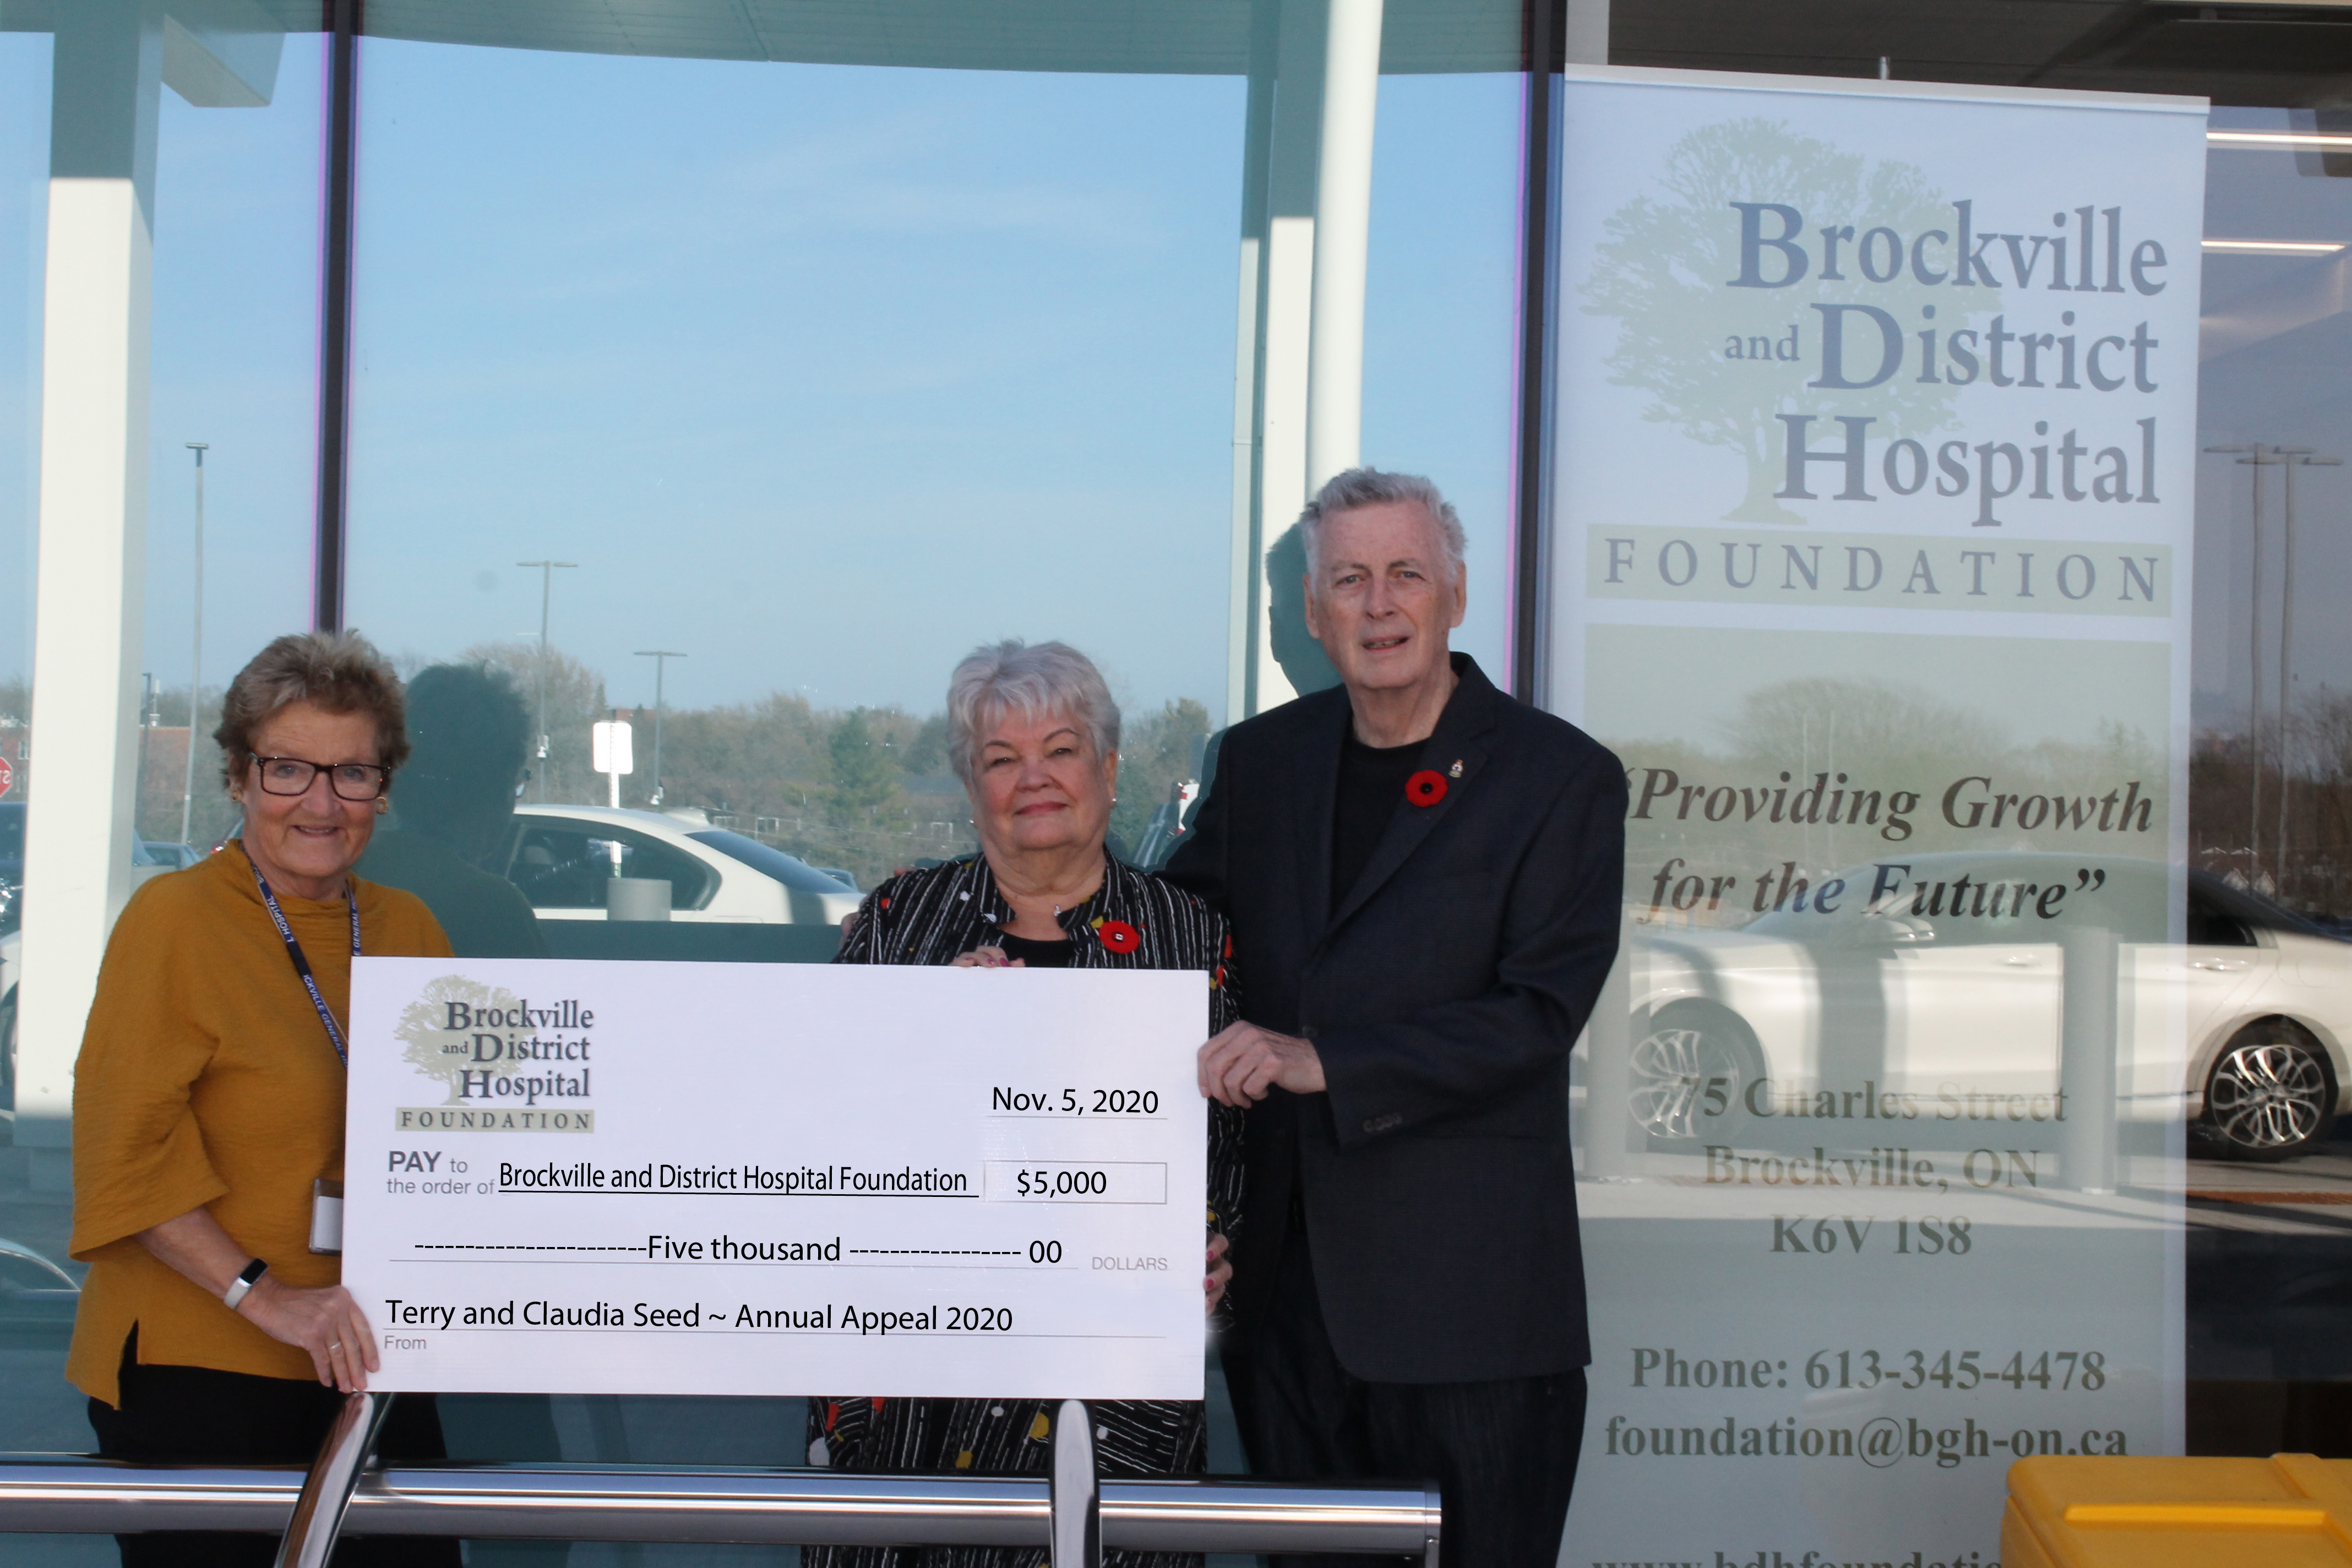 THE BROCKVILLE AND DISTRICT HOSPITAL FOUNDATION’S ANNUAL APPEAL GETS A $5,000 DONATION KICK START FROM 